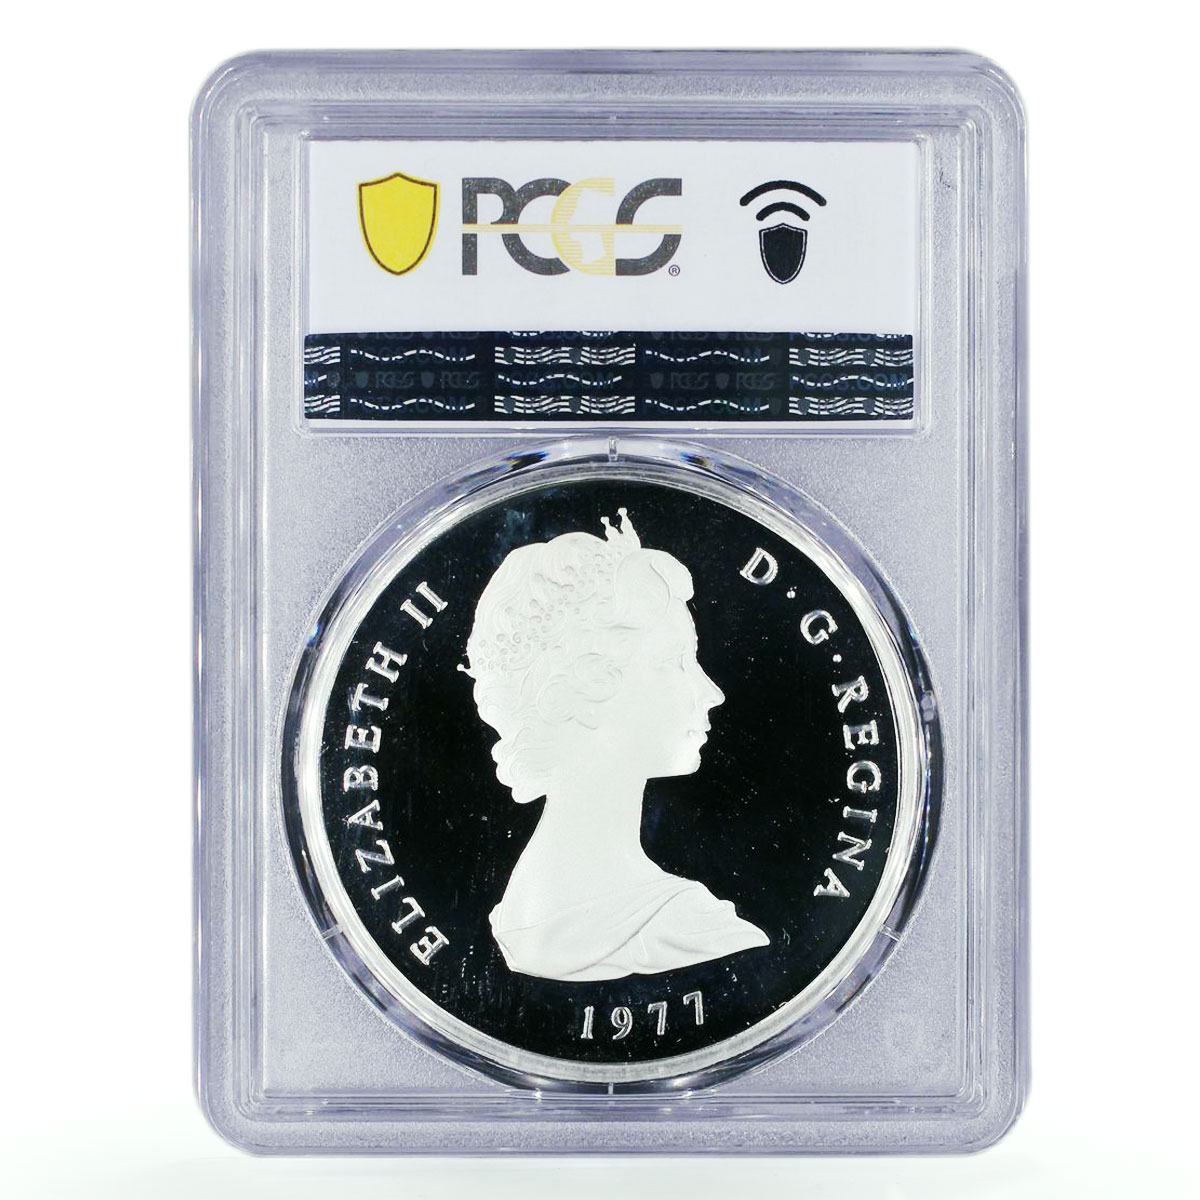 Turks and Caicos Islands 20 crowns George III PR68 PCGS silver coin 1977